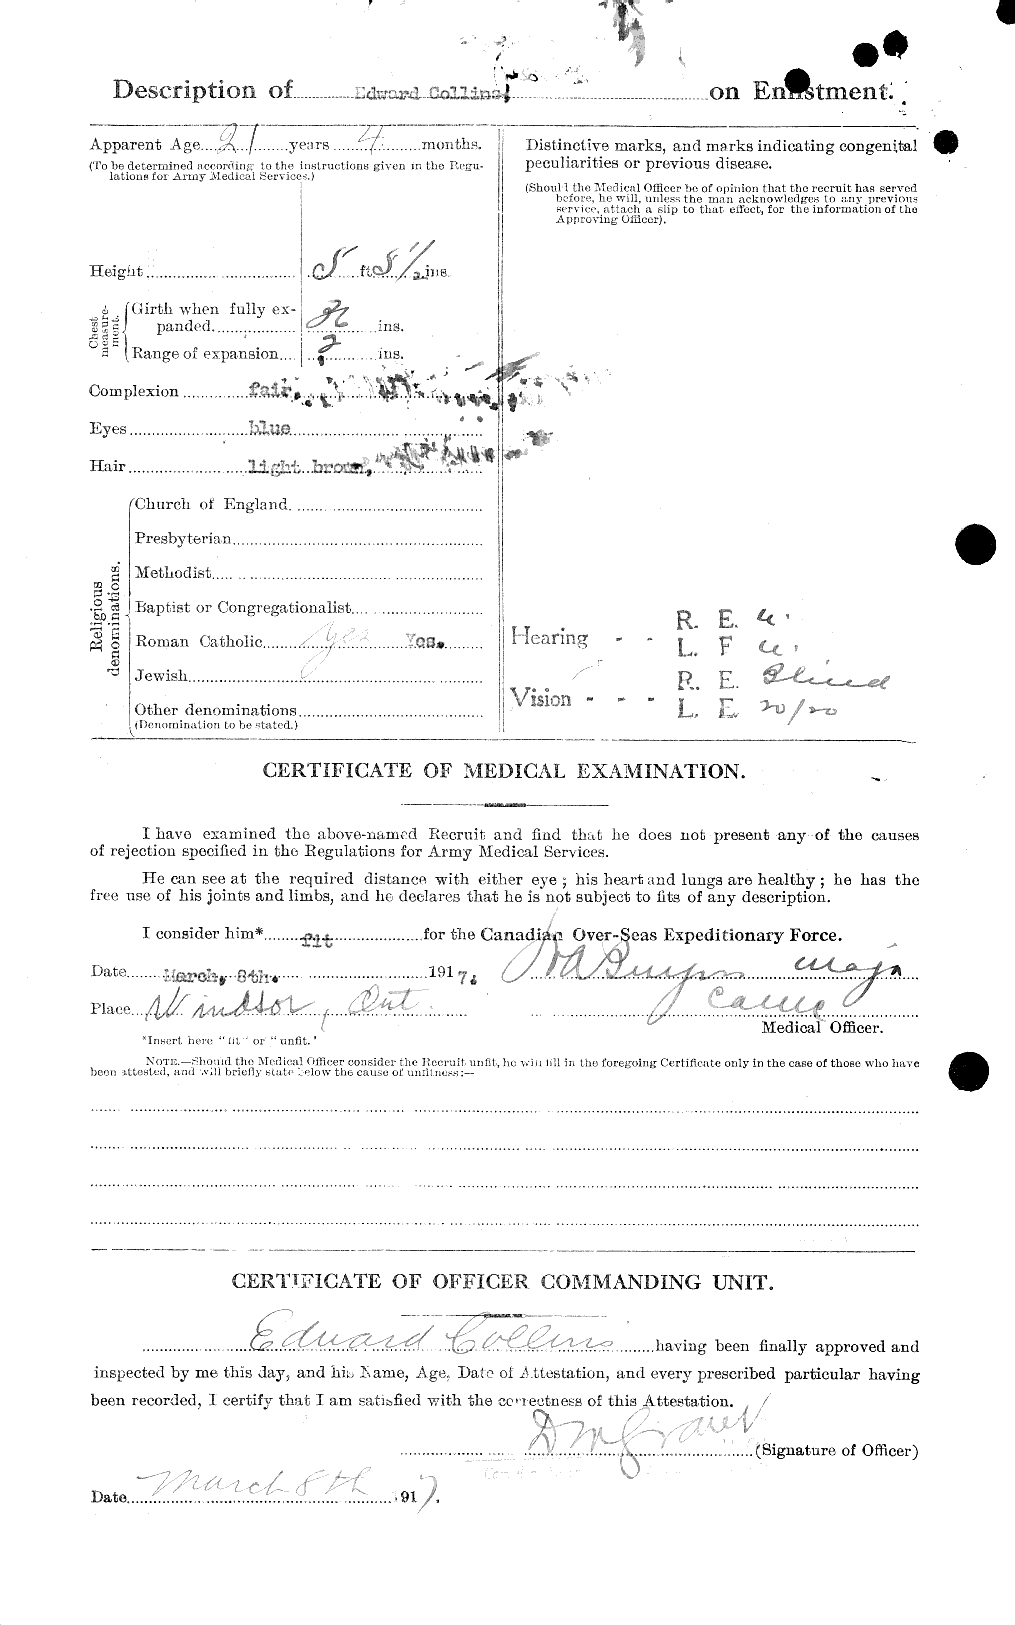 Personnel Records of the First World War - CEF 037740b